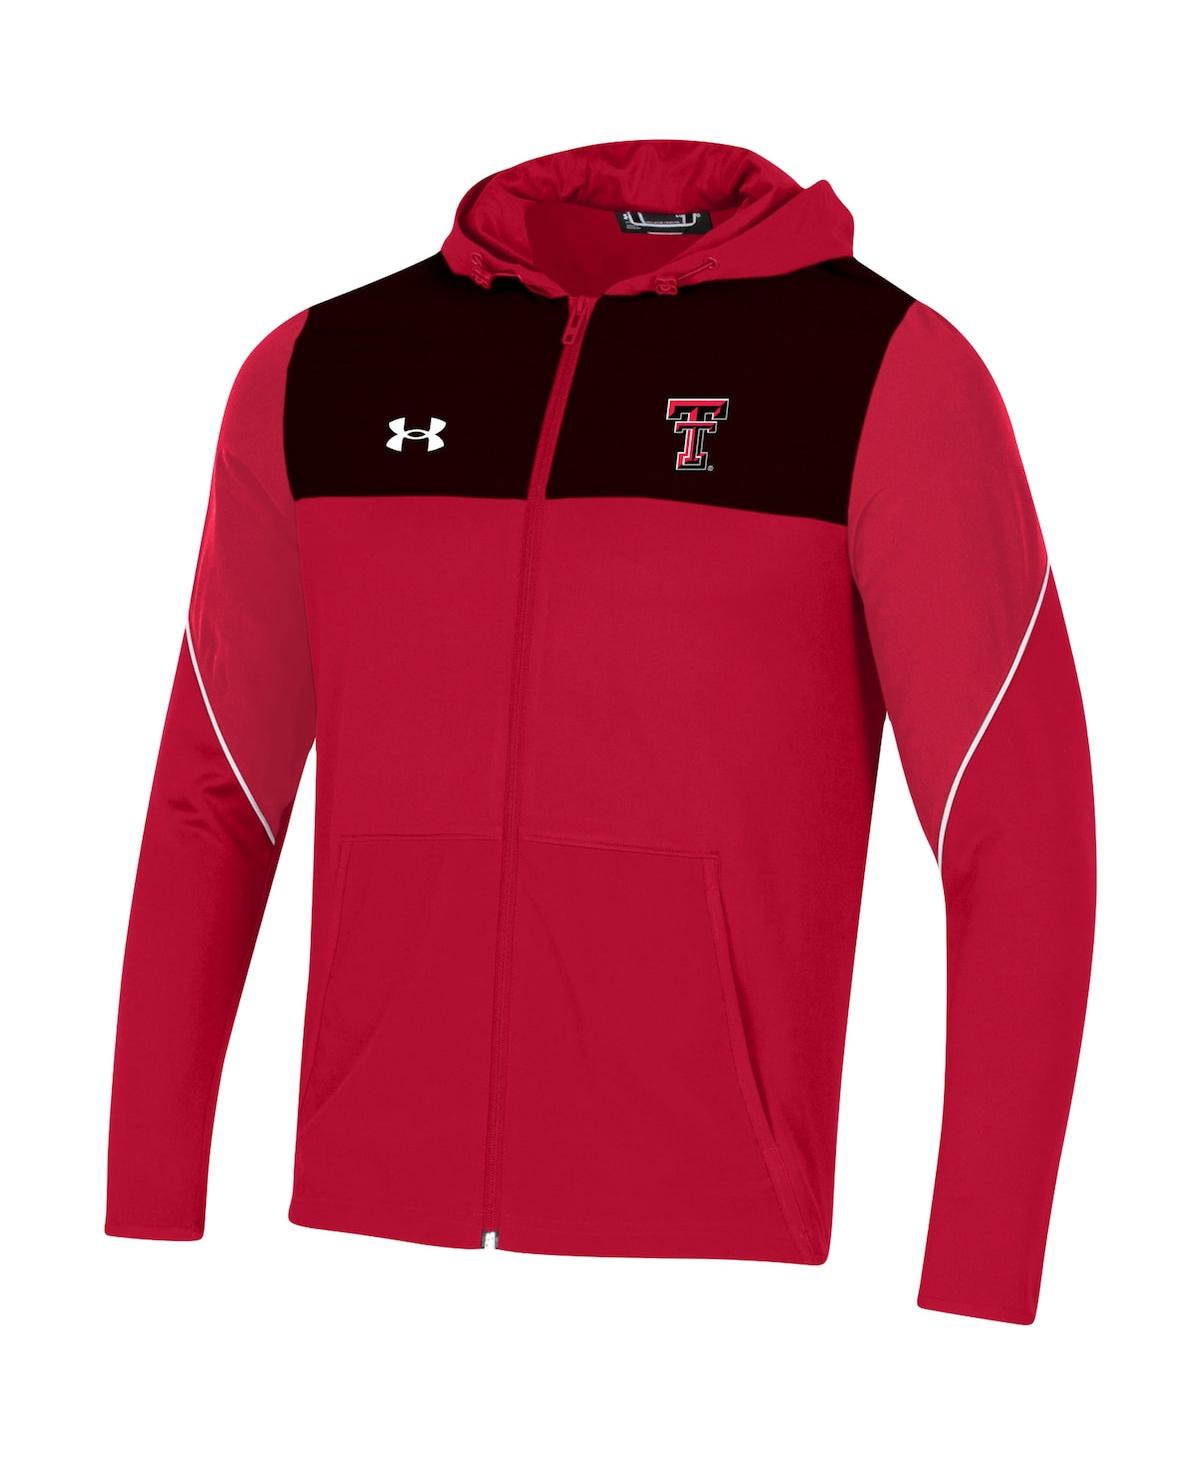 Shop Under Armour Men's  Red Texas Tech Red Raiders 2021 Sideline Warm-up Full-zip Hoodie